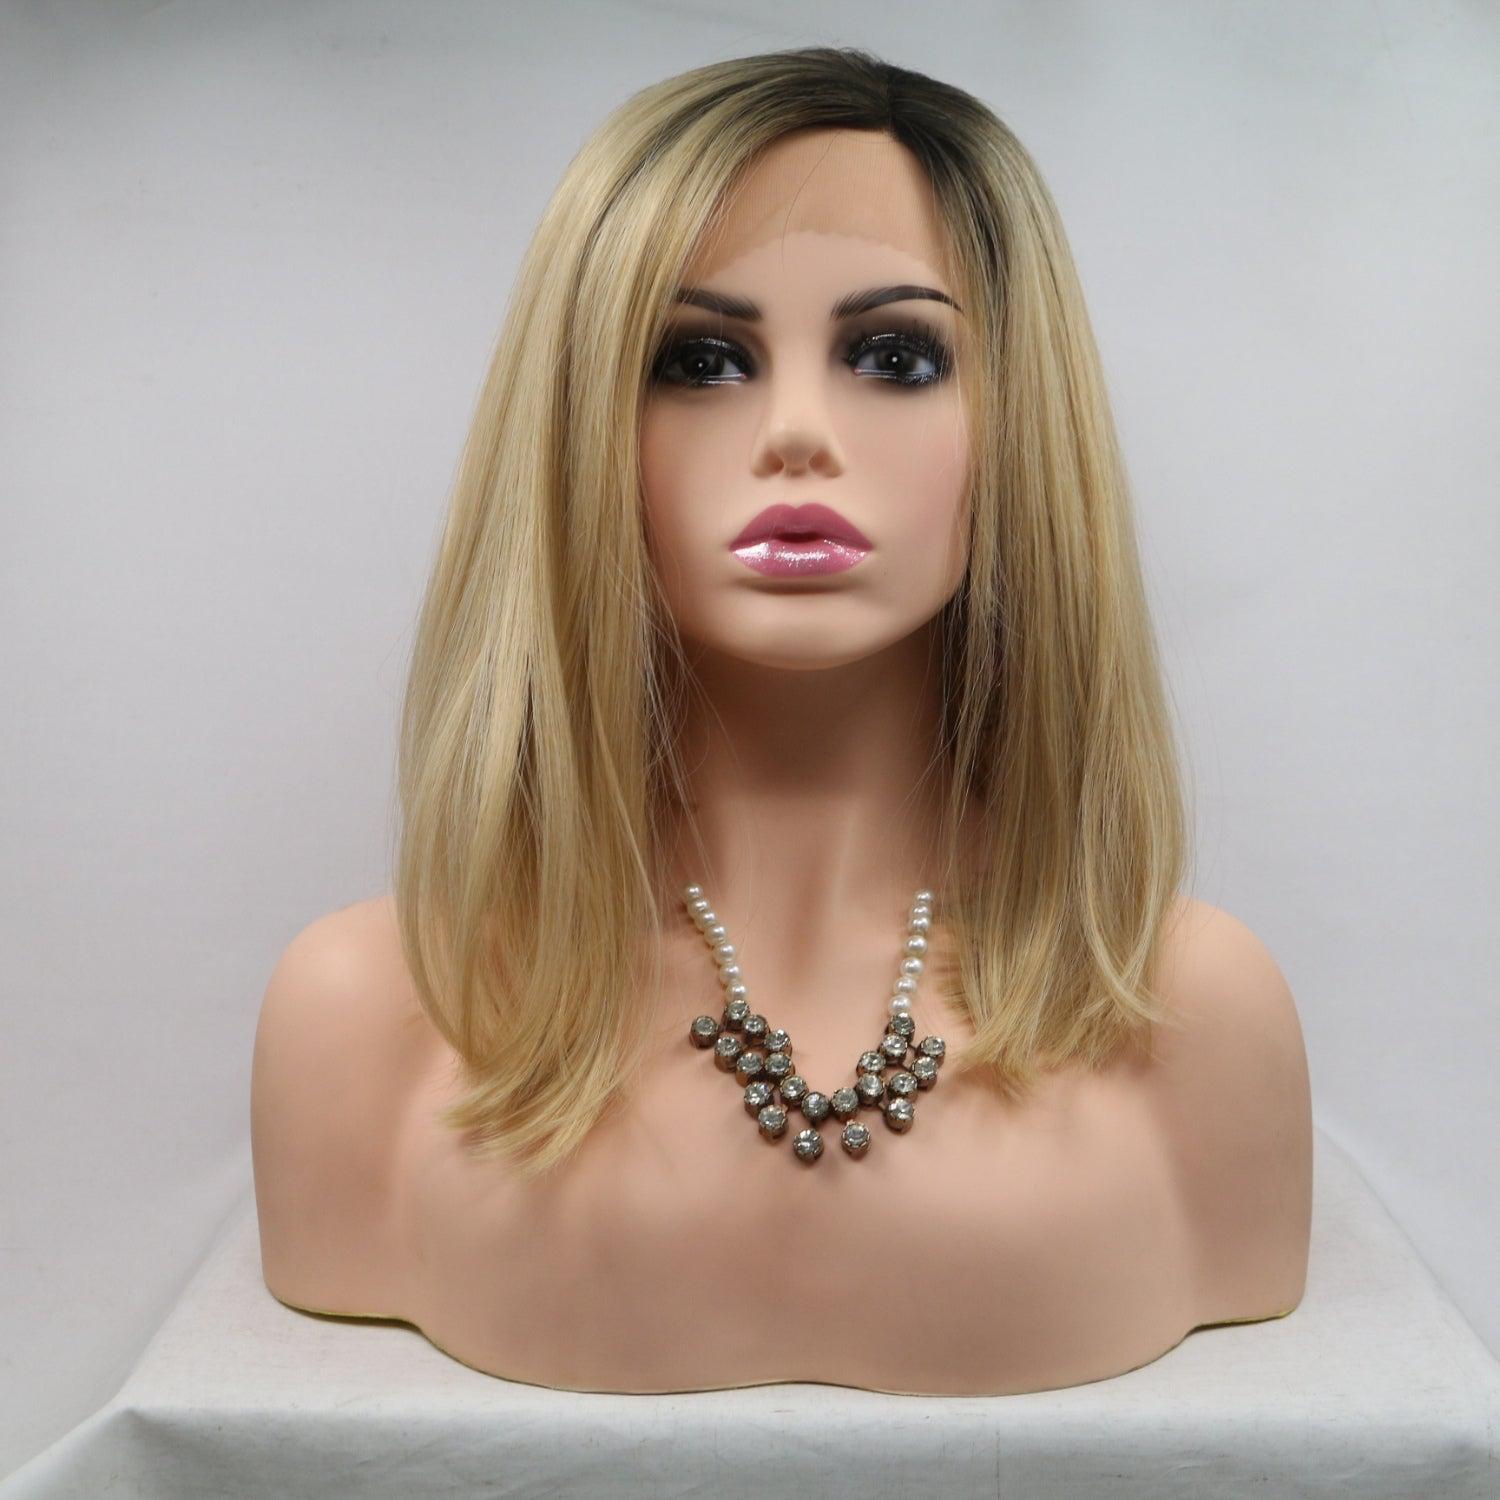 a mannequin head with a necklace on it